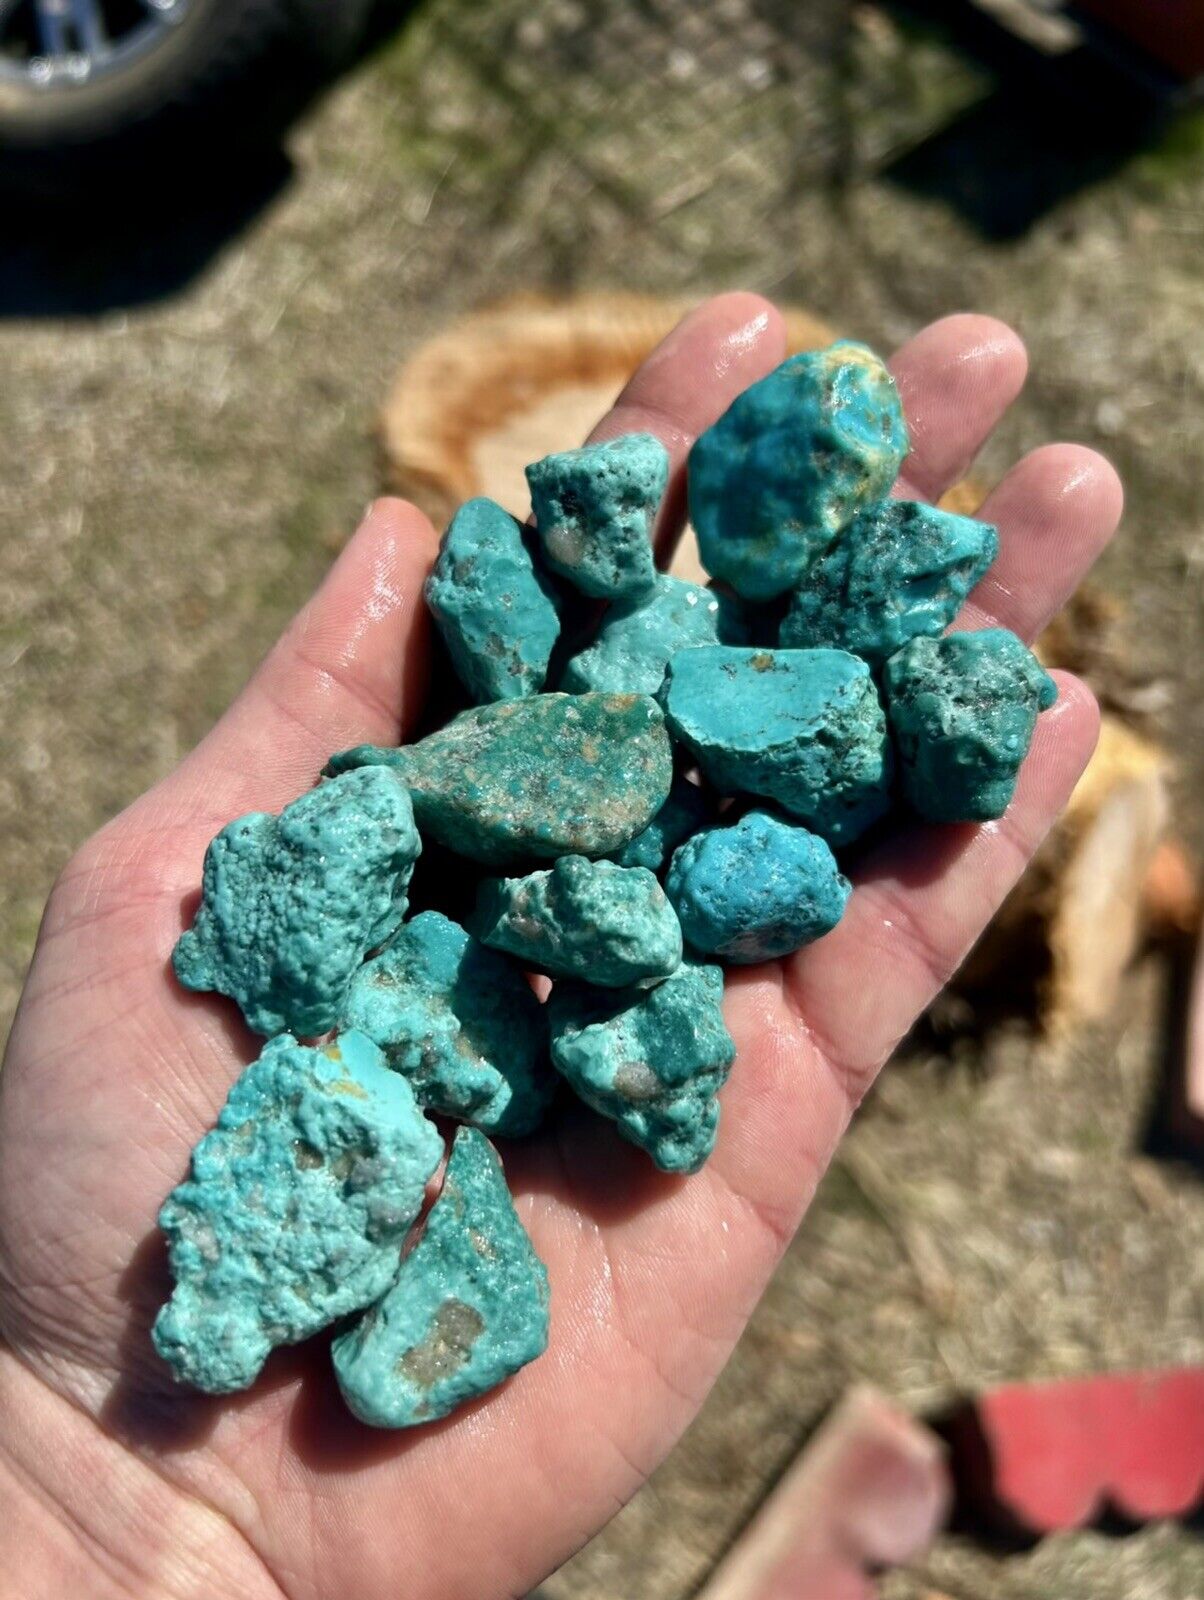 Special Offer: 1 LB Blue Basin Graded Turquoise, Arizona-mined. Electric Blues